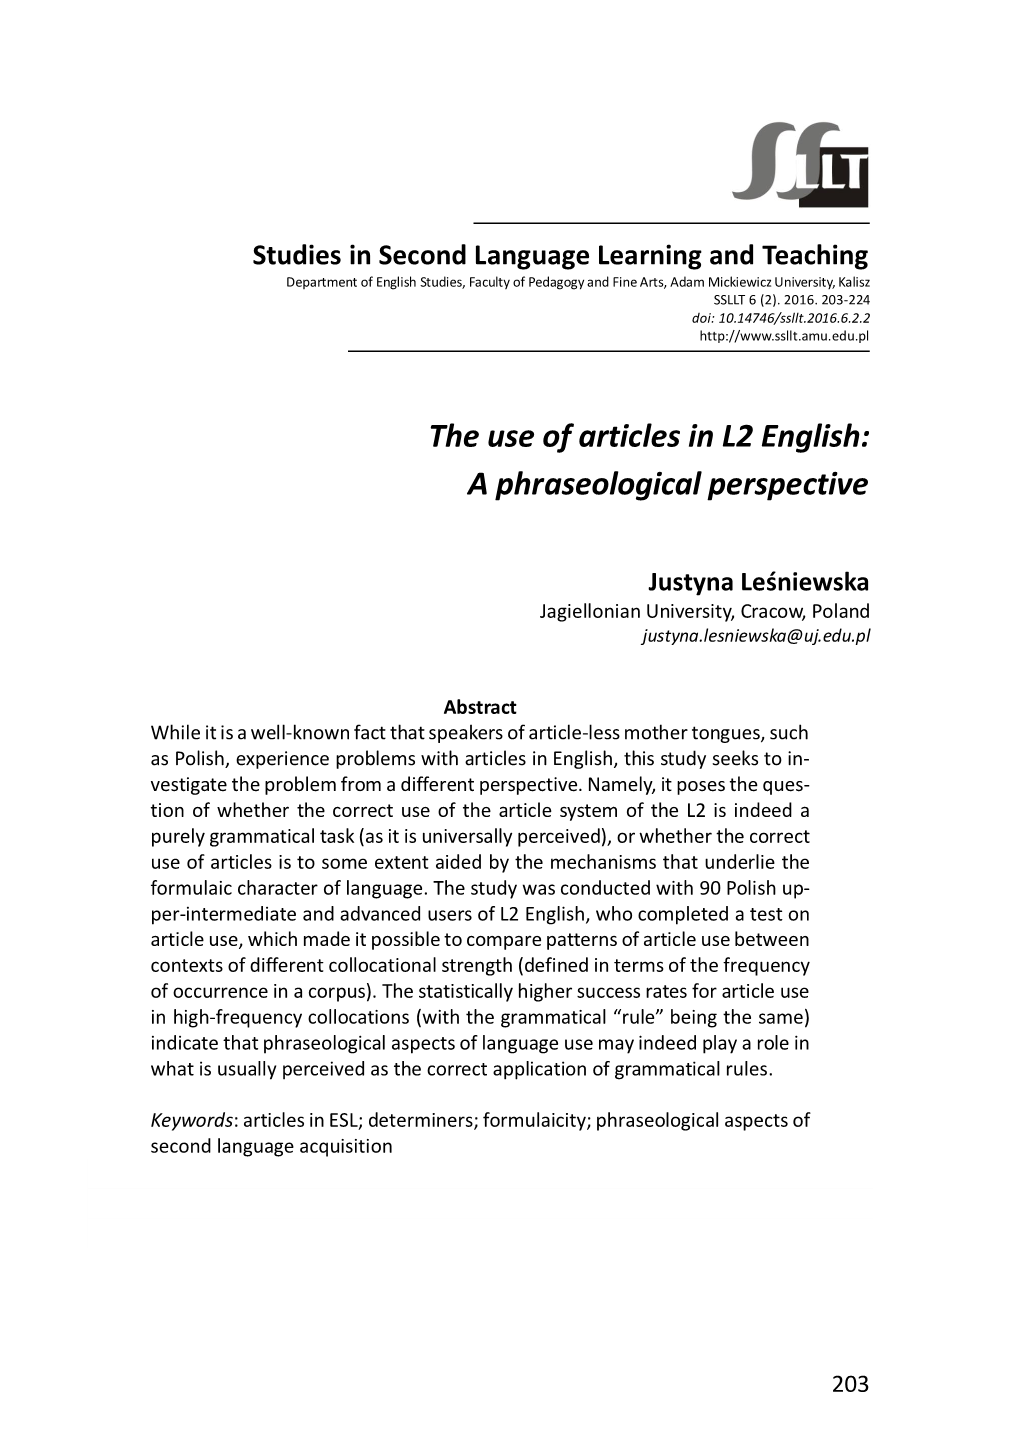 The Use of Articles in L2 English: a Phraseological Perspective